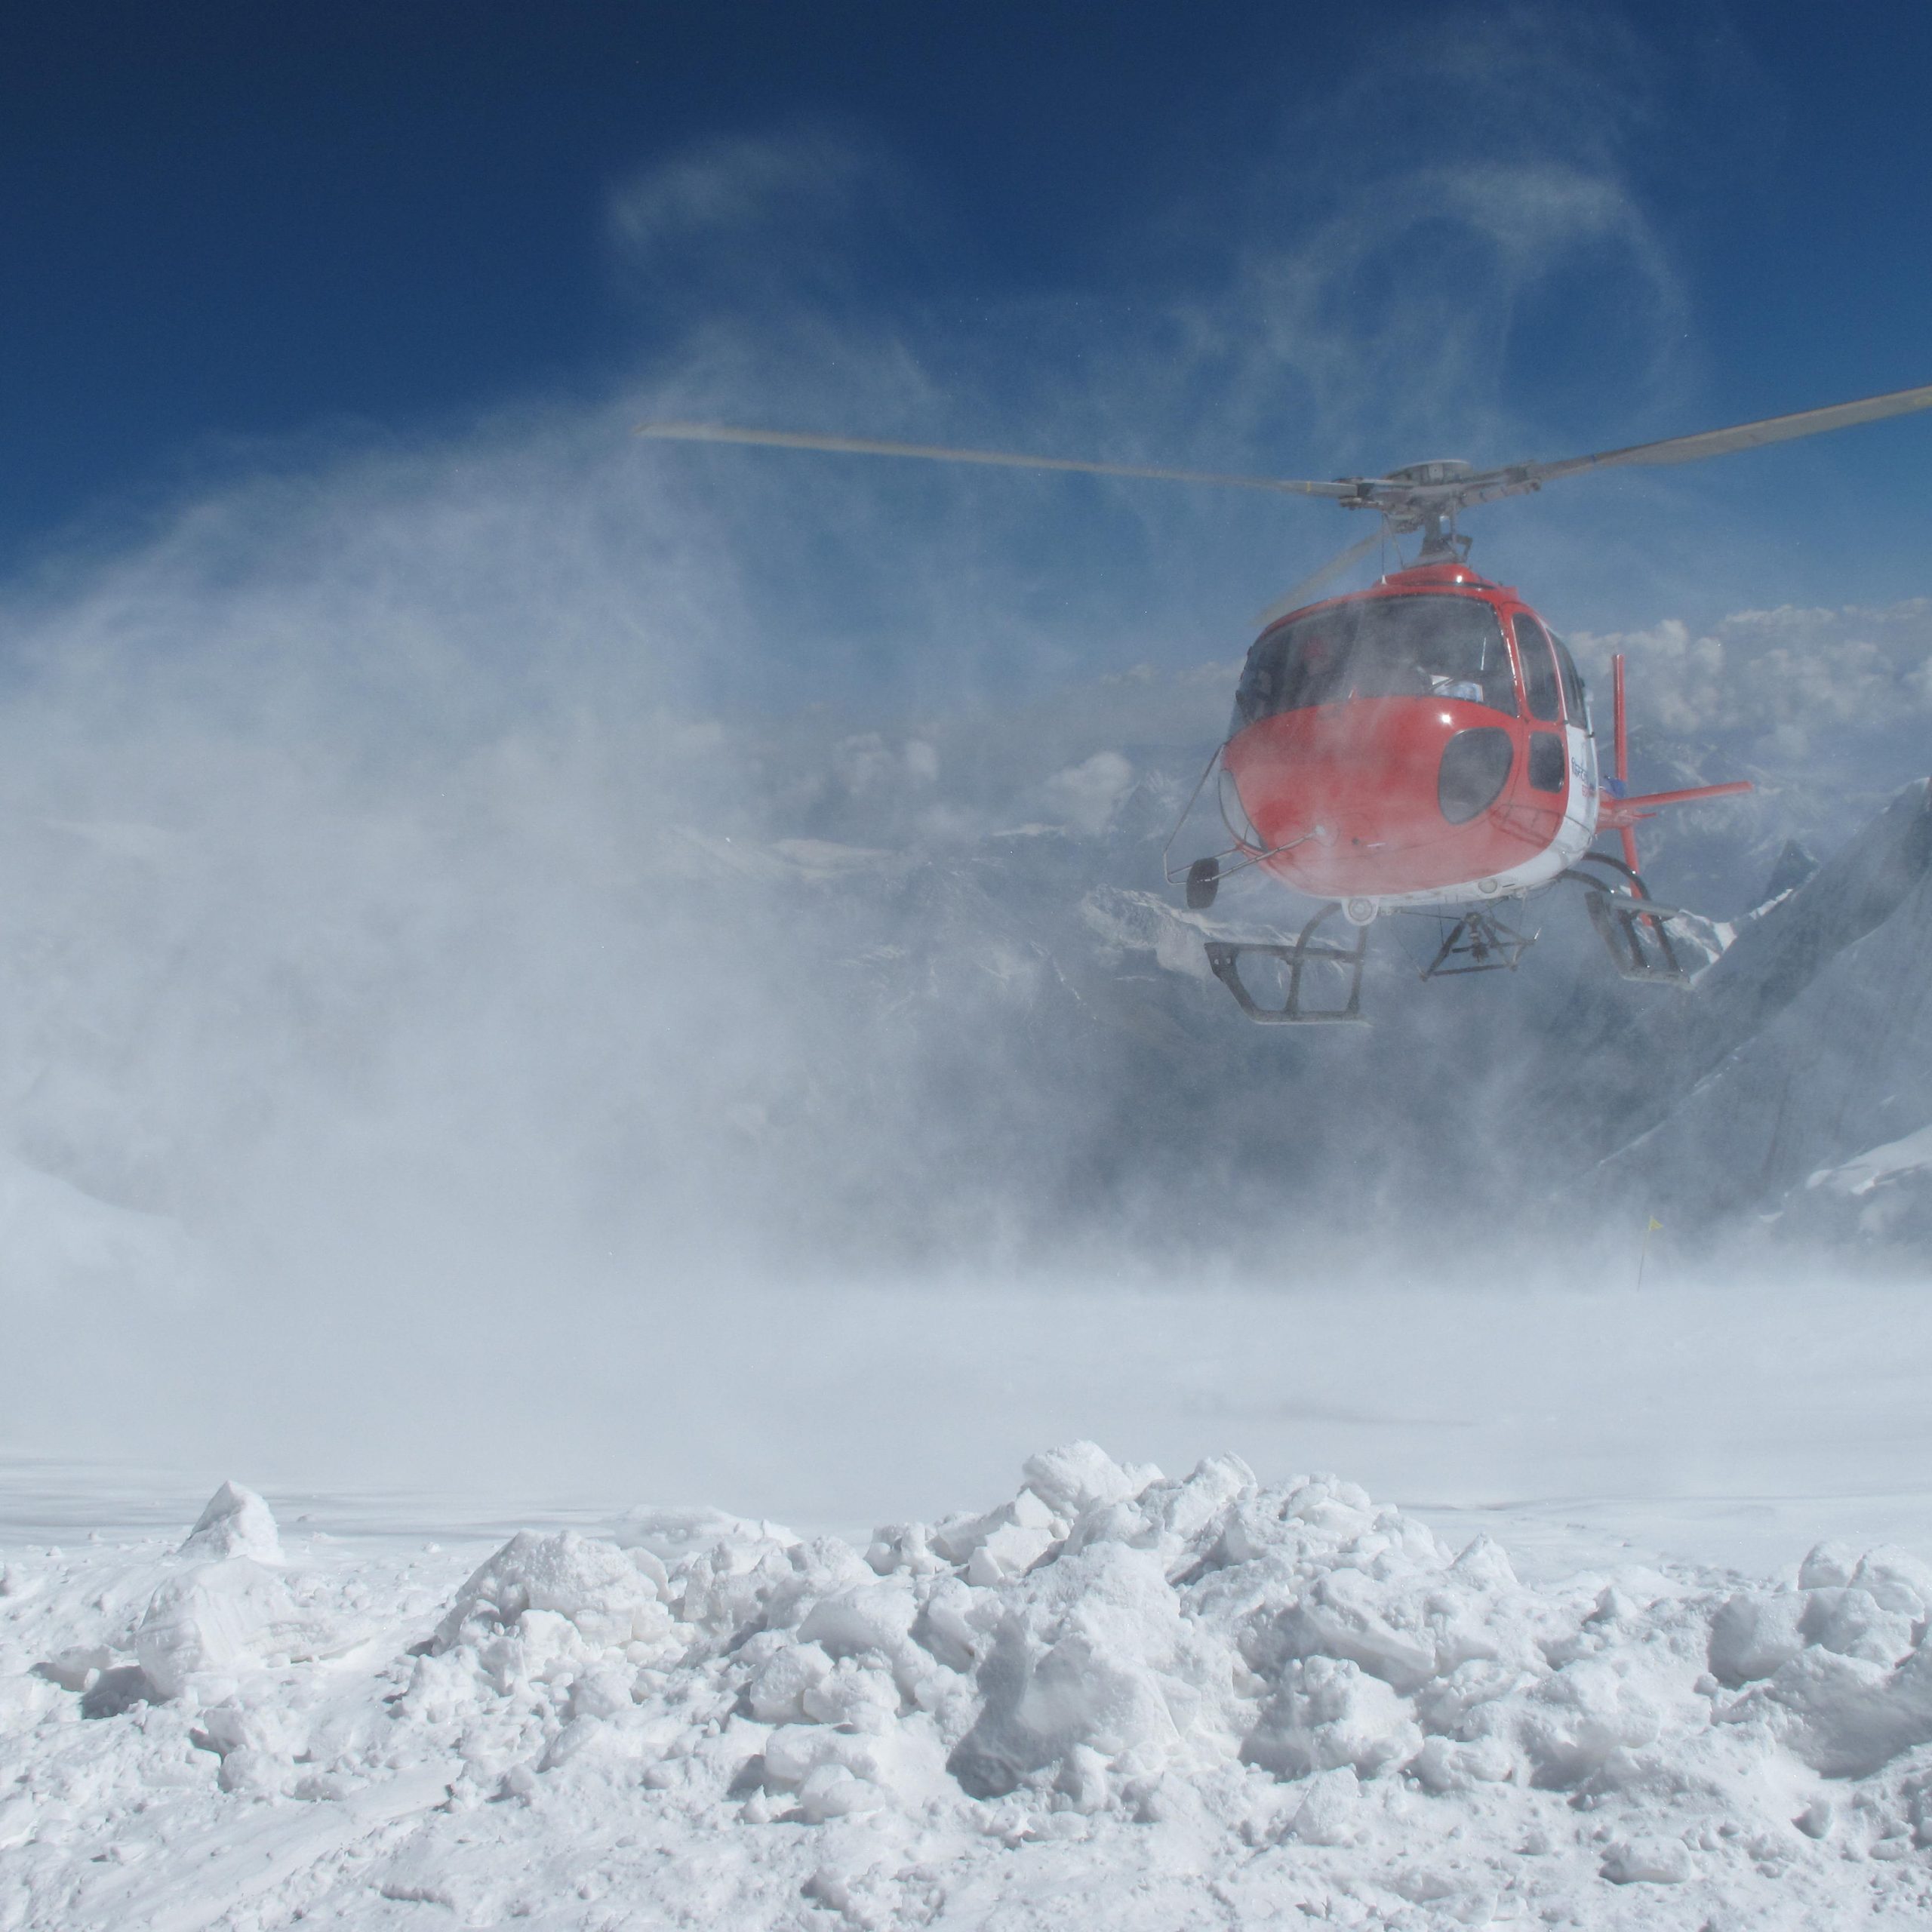 Everest base camp Helicopter Tour